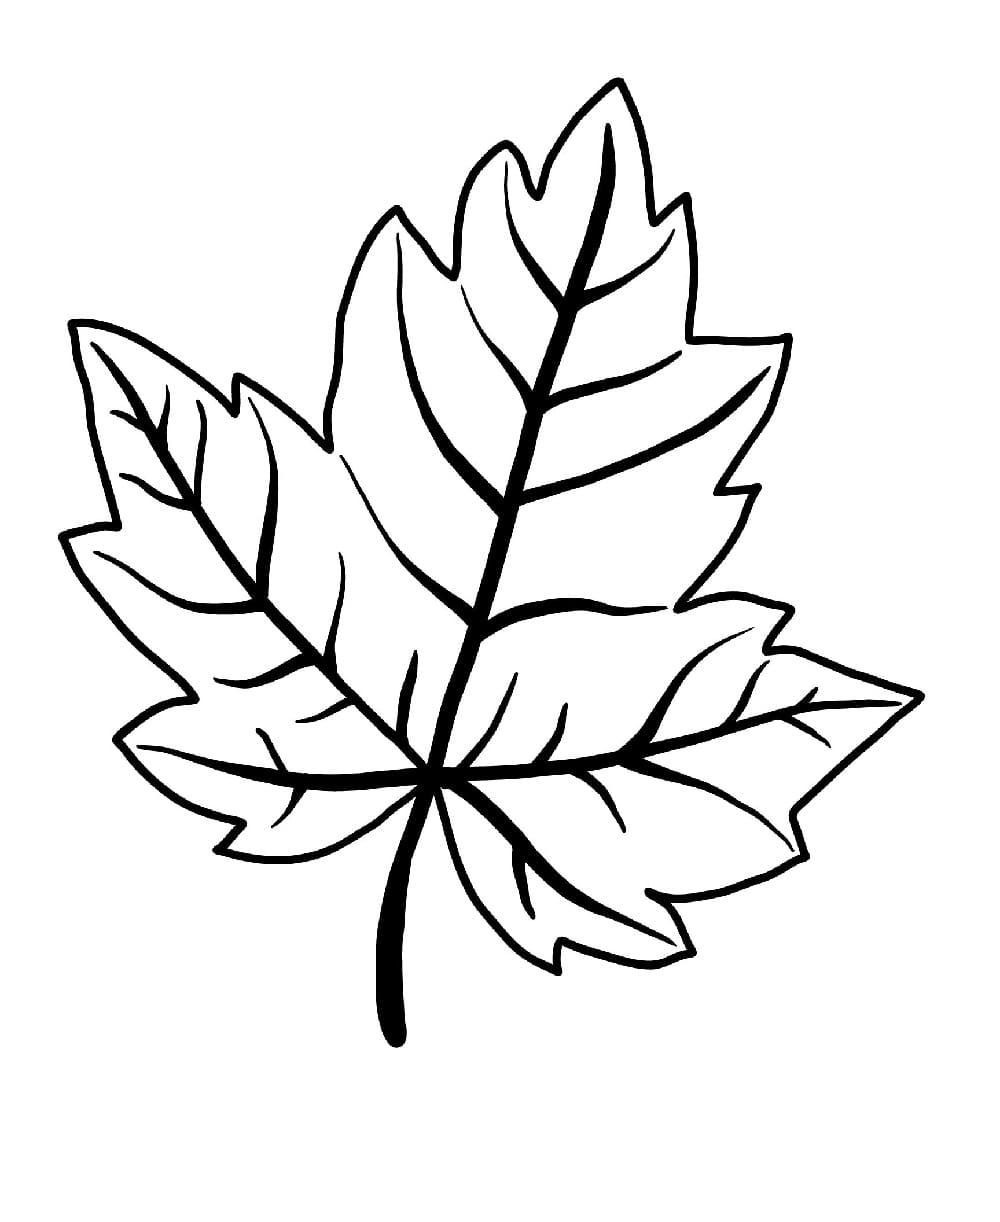 Printable Leaf Template Pictures